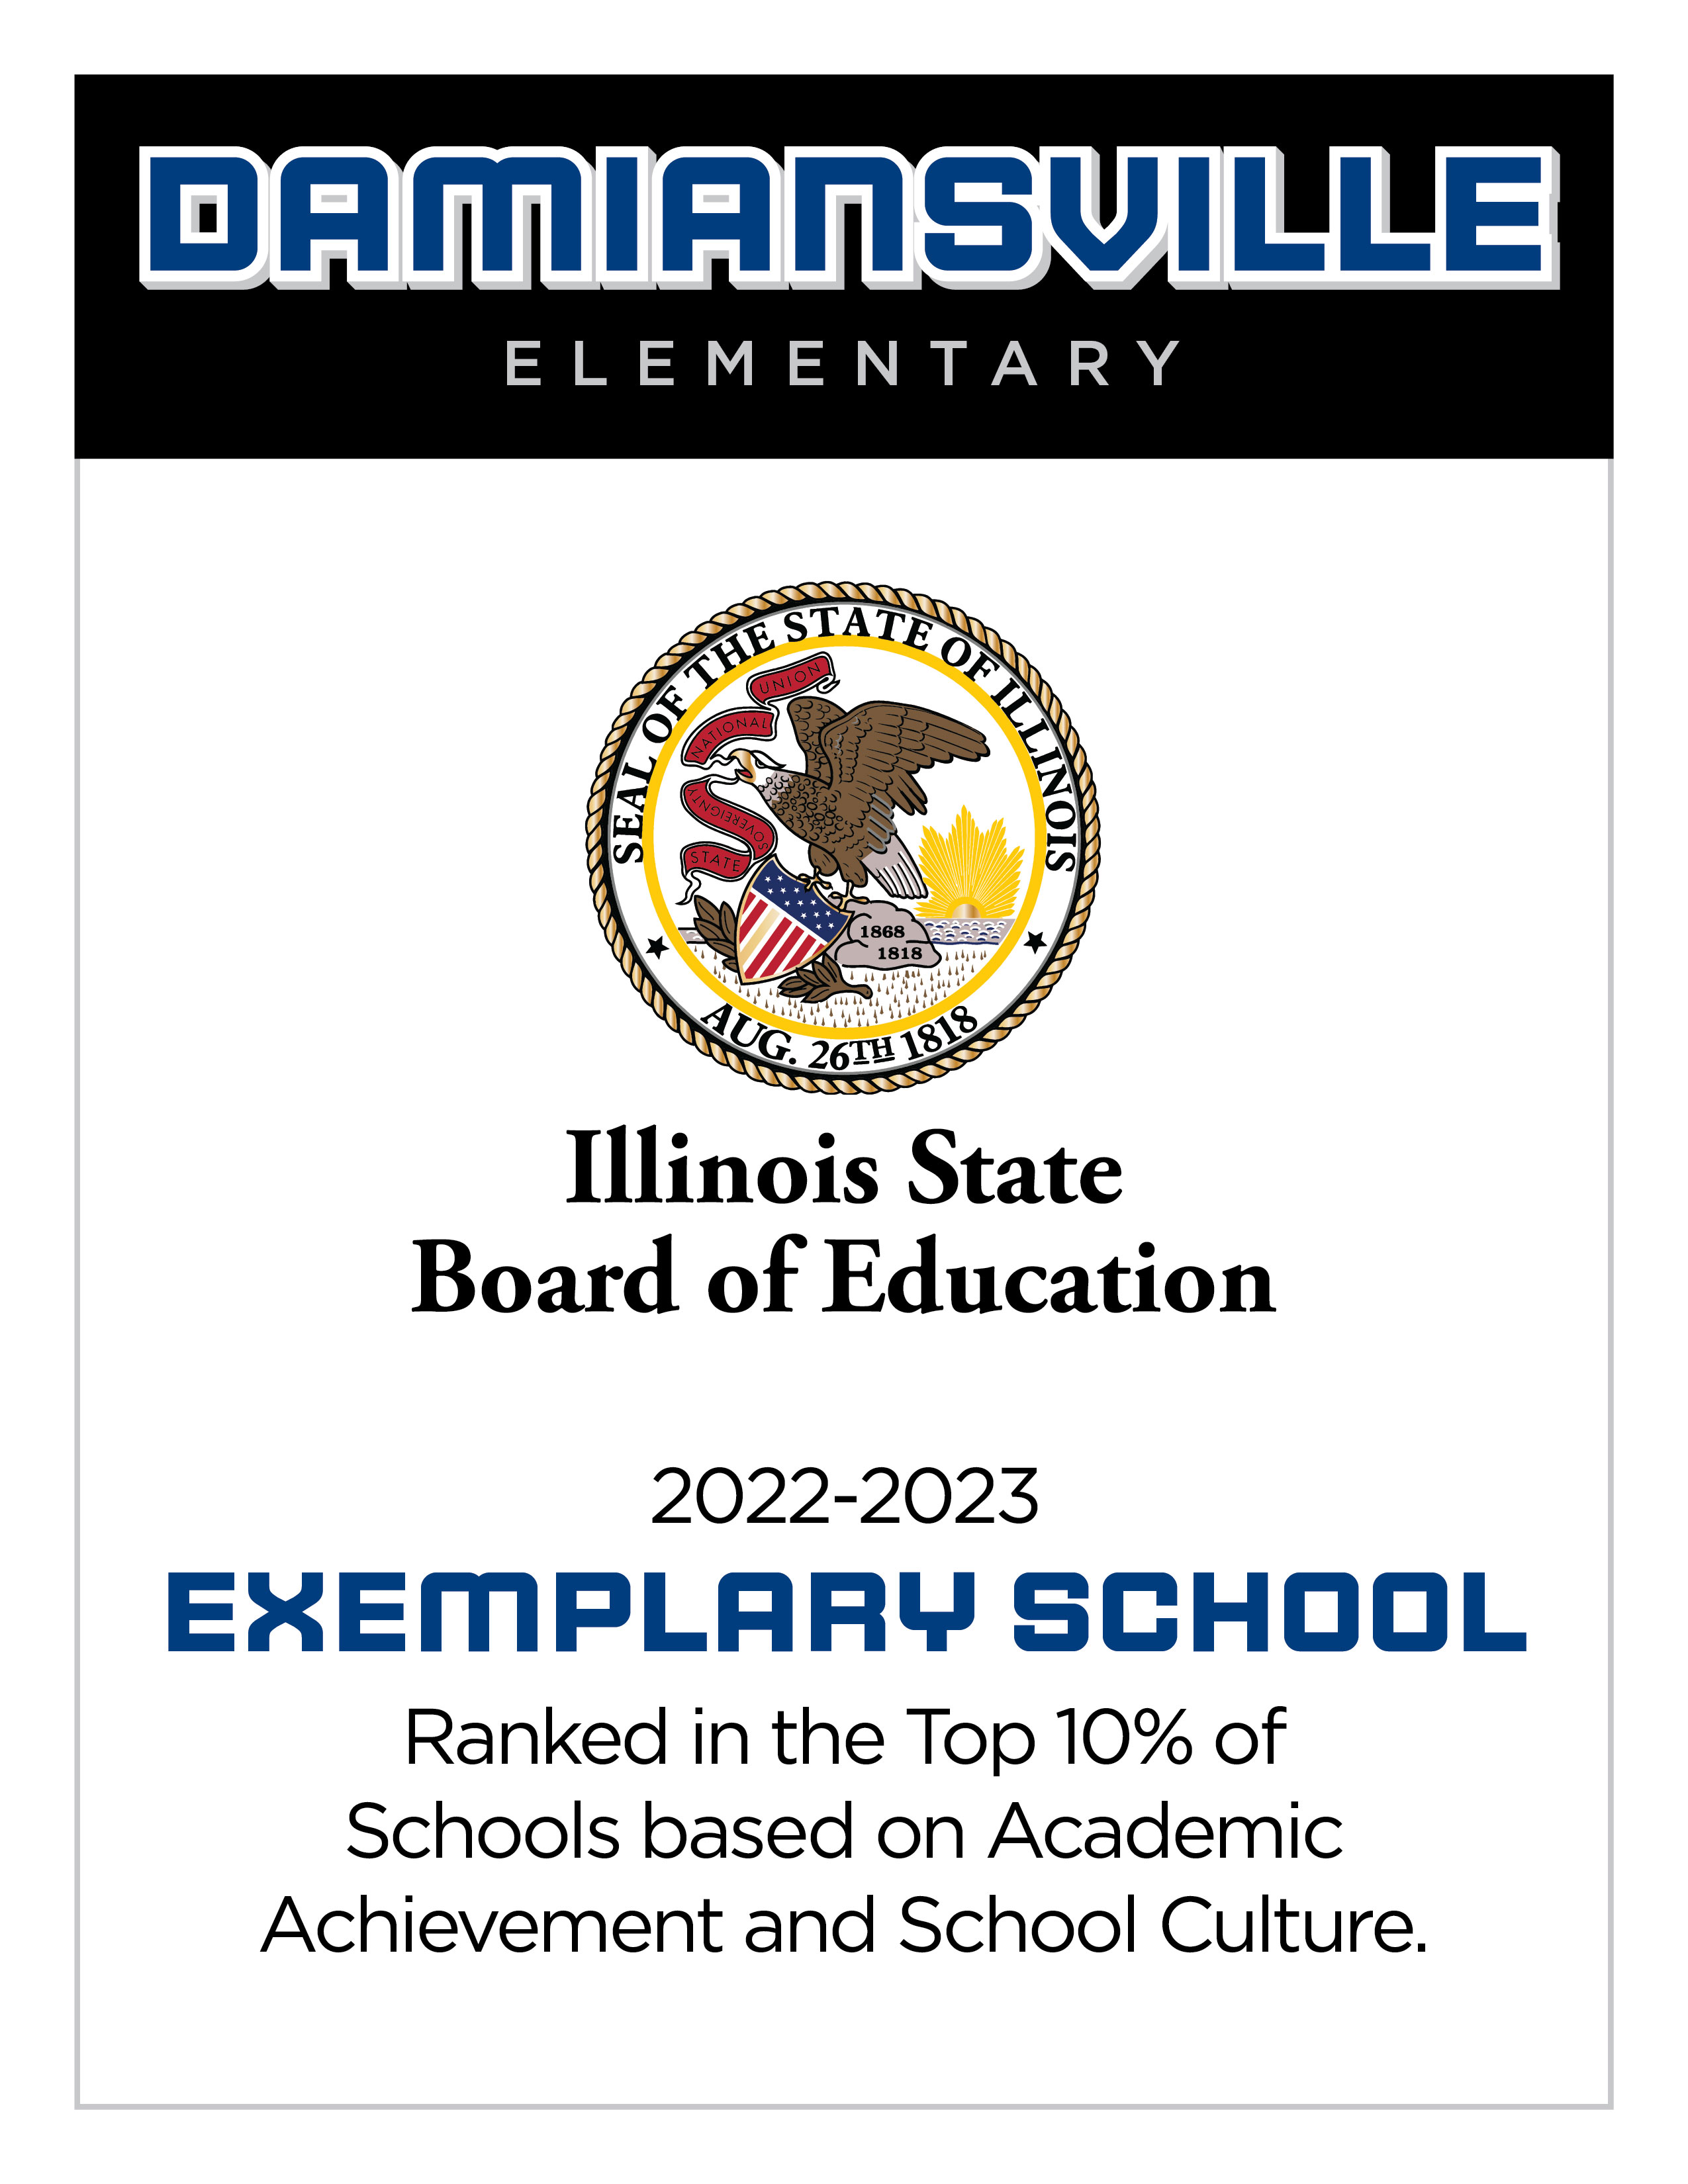 Damiansville Elementary School is a Illinois State Board of Education 2022-2023 Exemplary School